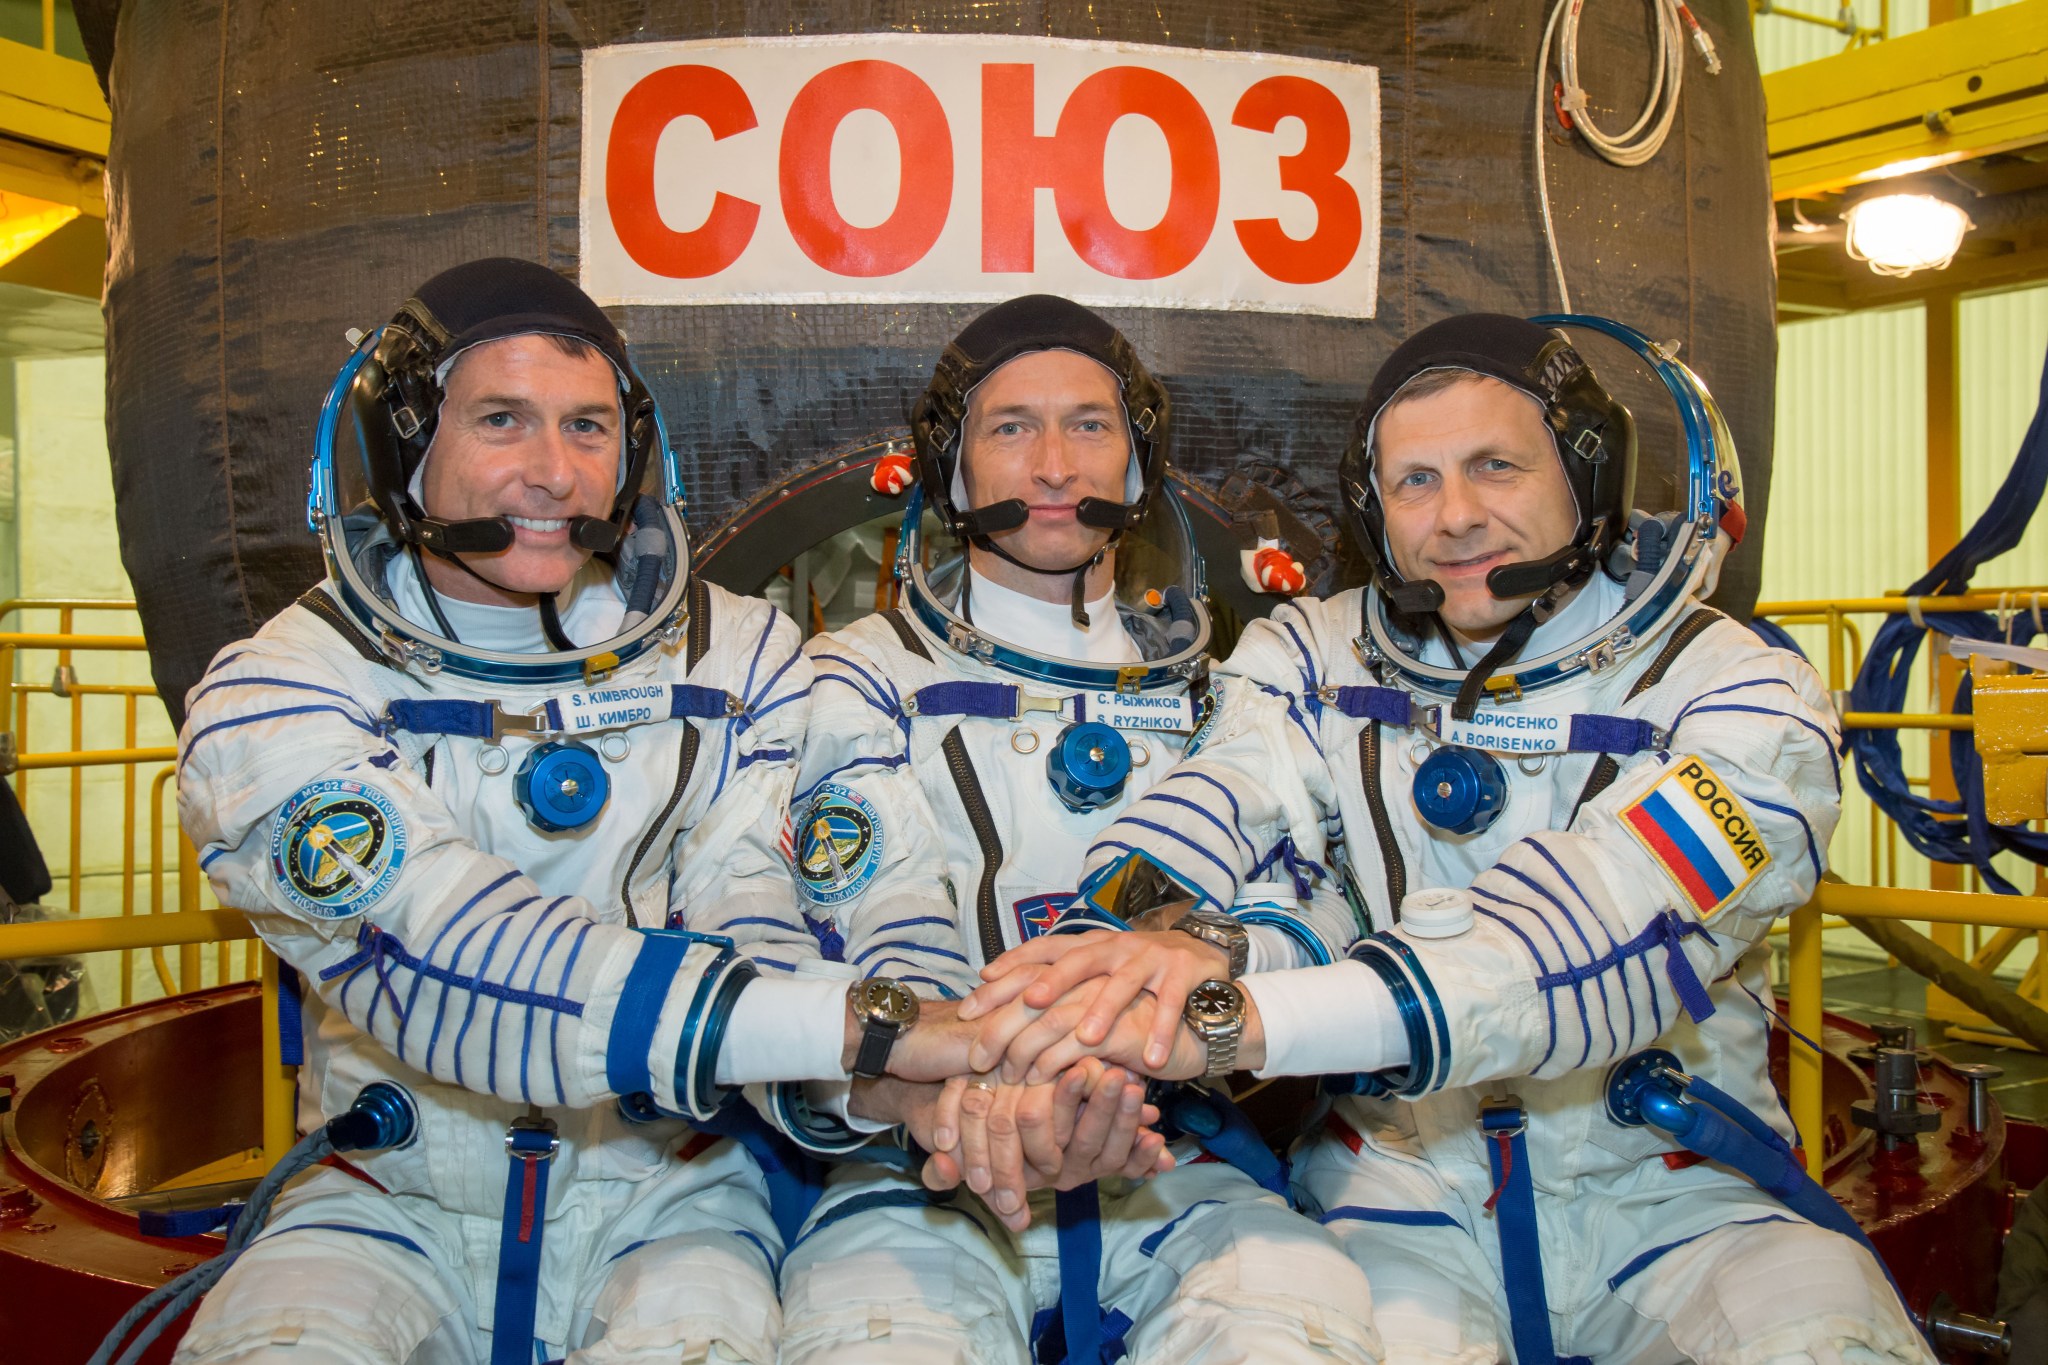 Expedition 49 crewmembers Shane Kimbrough of NASA and Sergey Ryzhikov and Andrey Borisenko of the Russian space agency Roscosmos